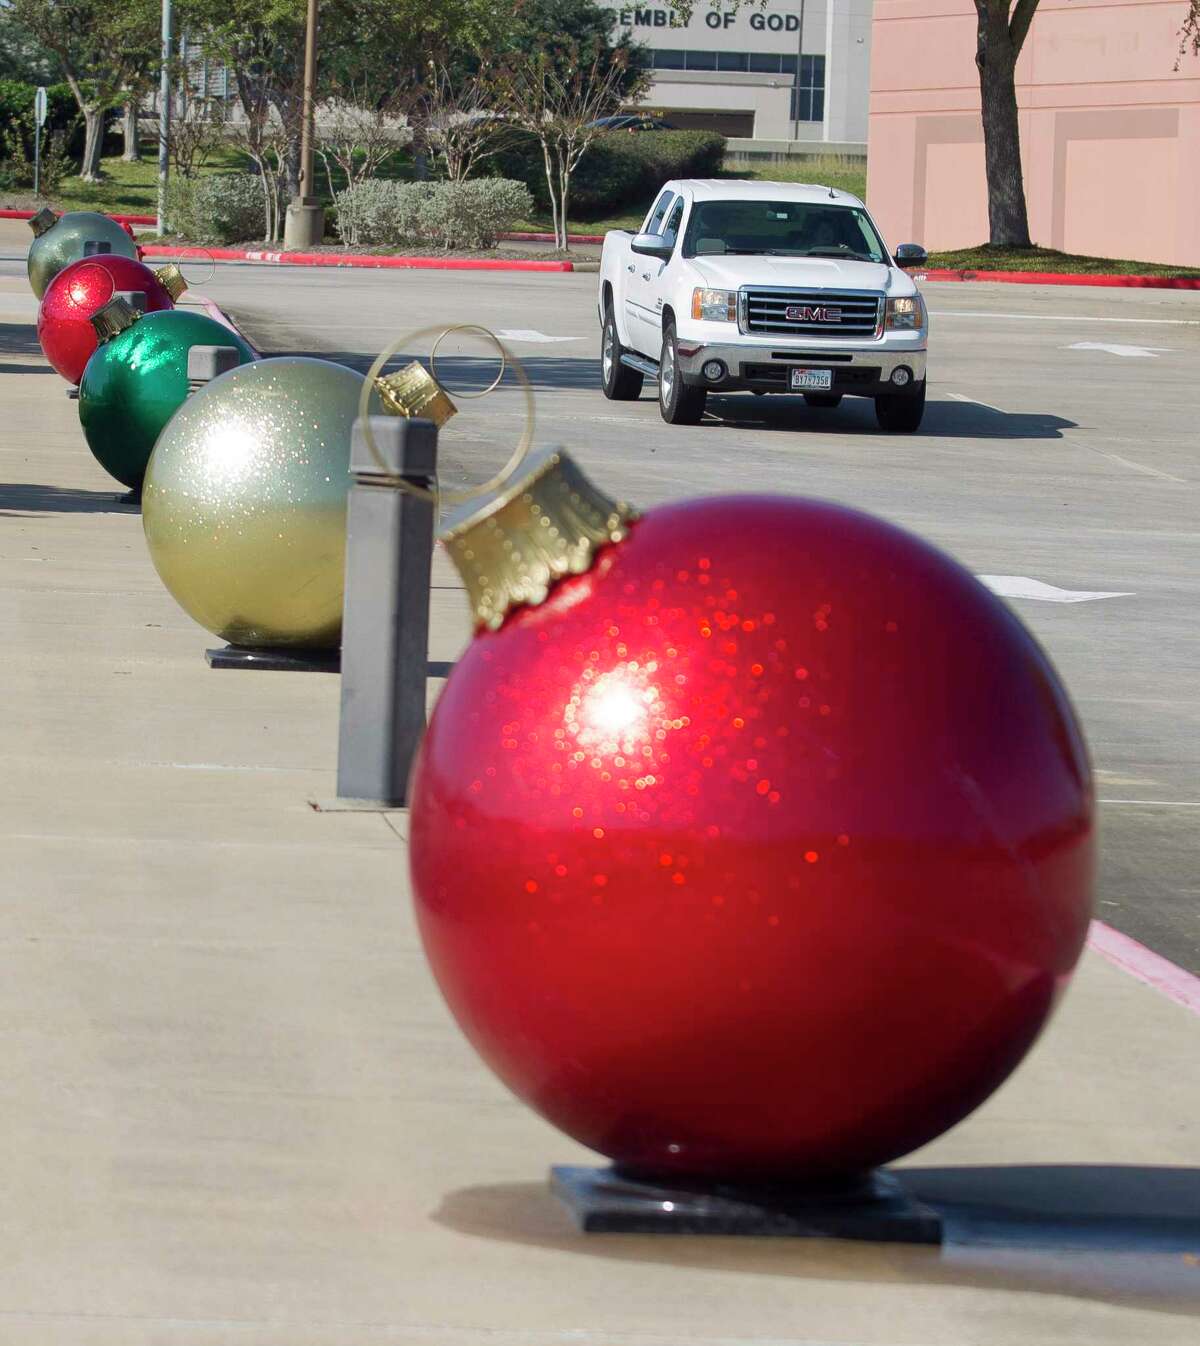 Patrons drive through the Conroe Outlet Mall before Thanksgiving, Wednesday, Nov. 22, 2017, in Conroe.